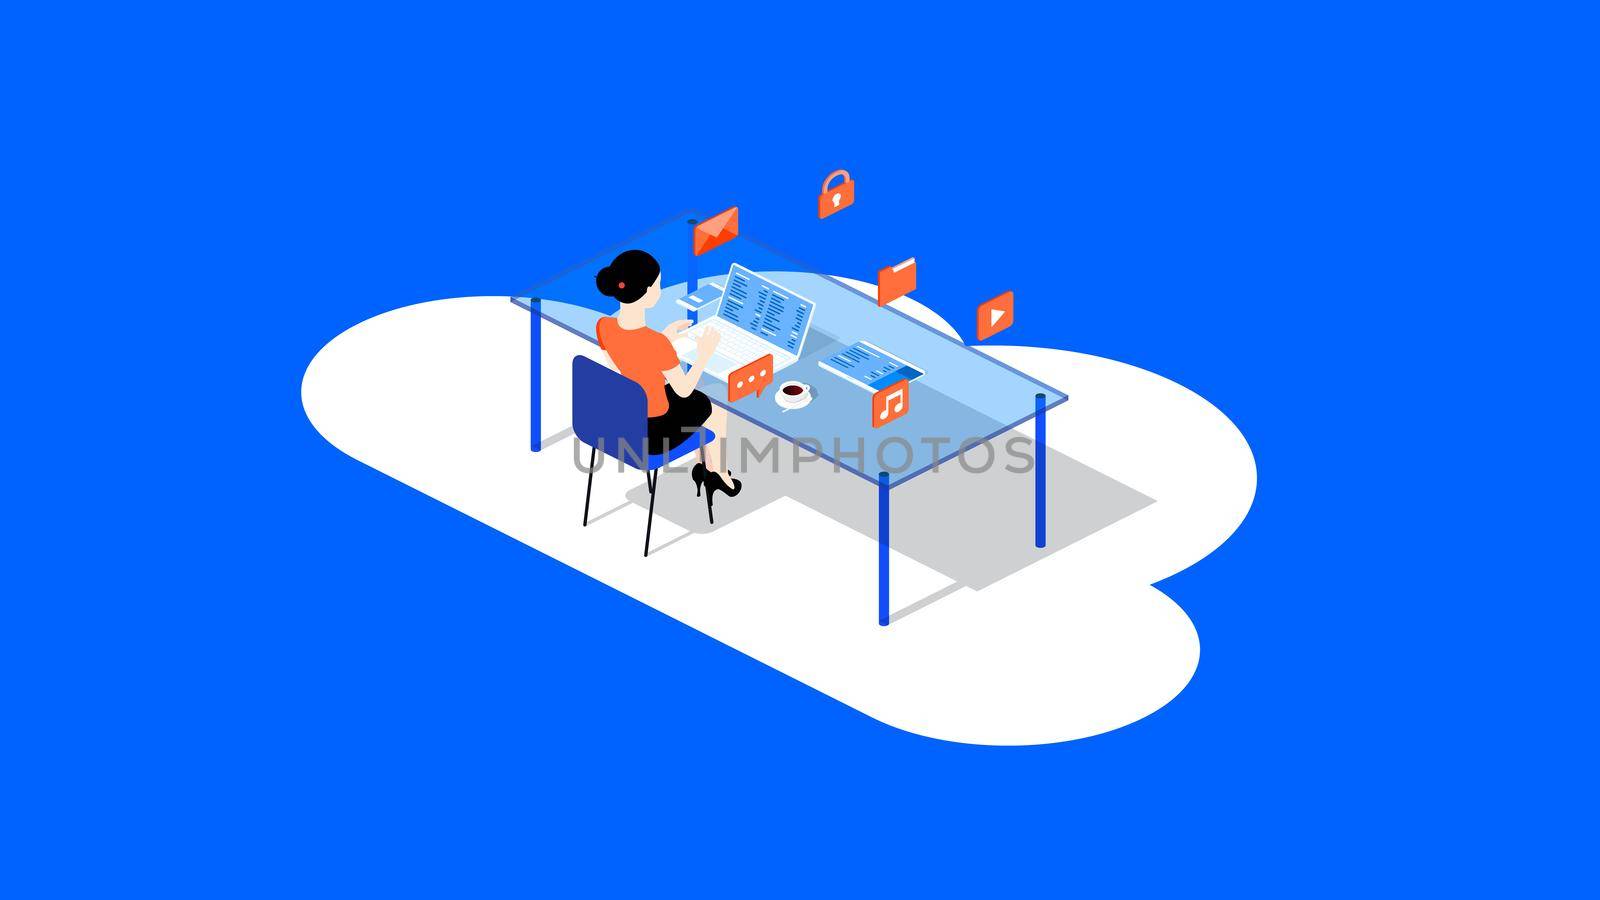 A woman sits at a table and works with the team through a cloud service. Conceptual isometric vector illustration.